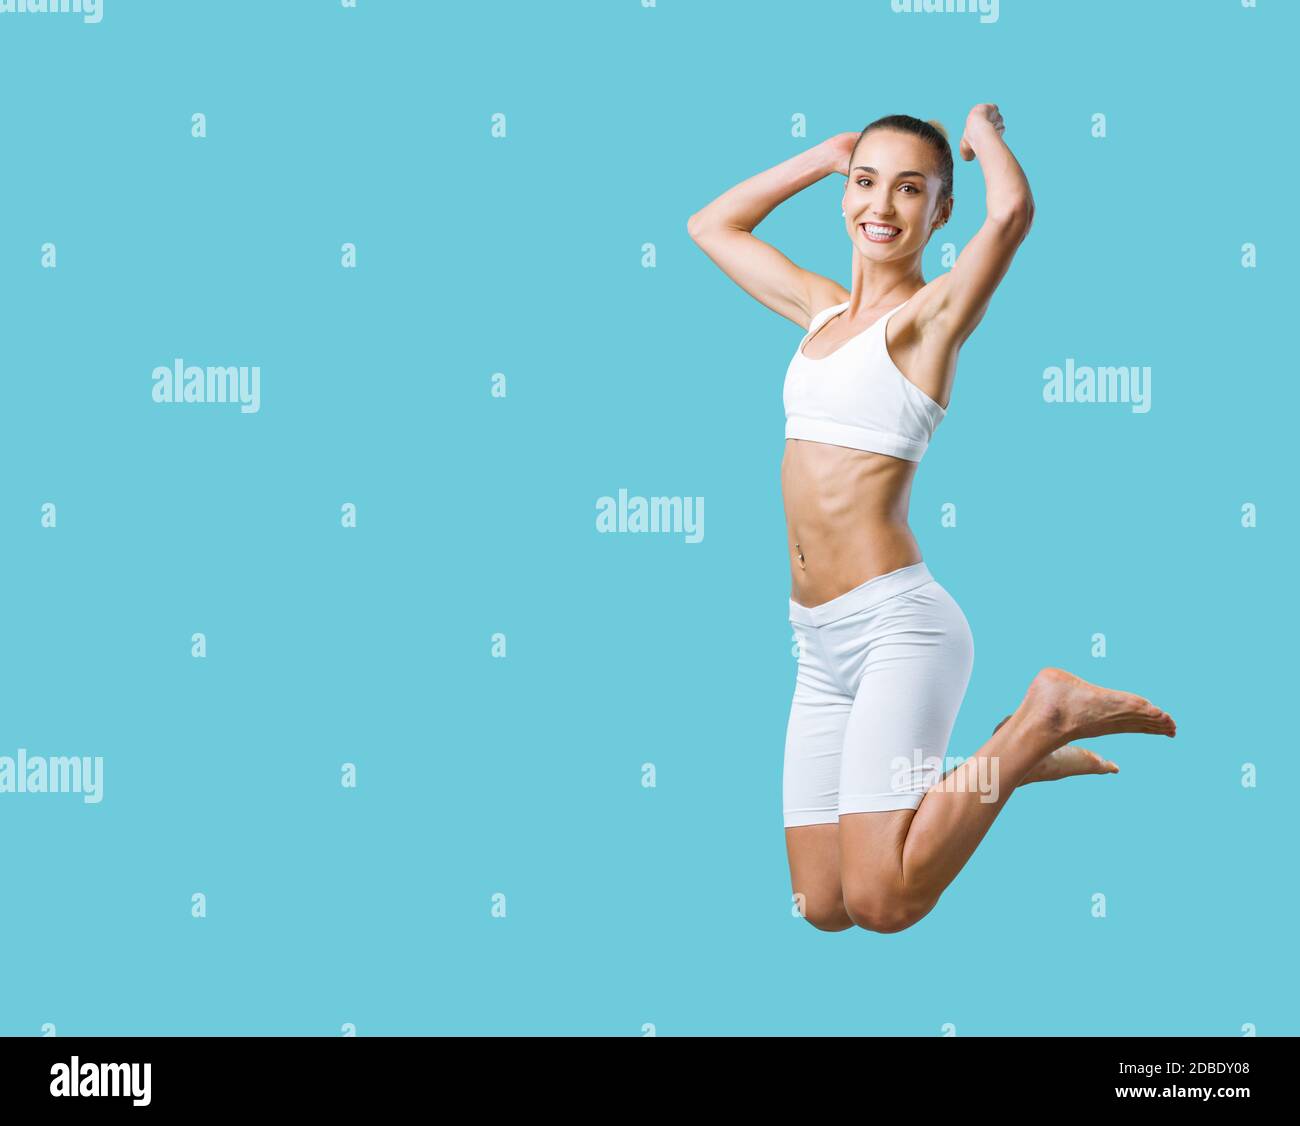 Happy fit woman jumping and smiling, weight loss and exercise concept Stock Photo